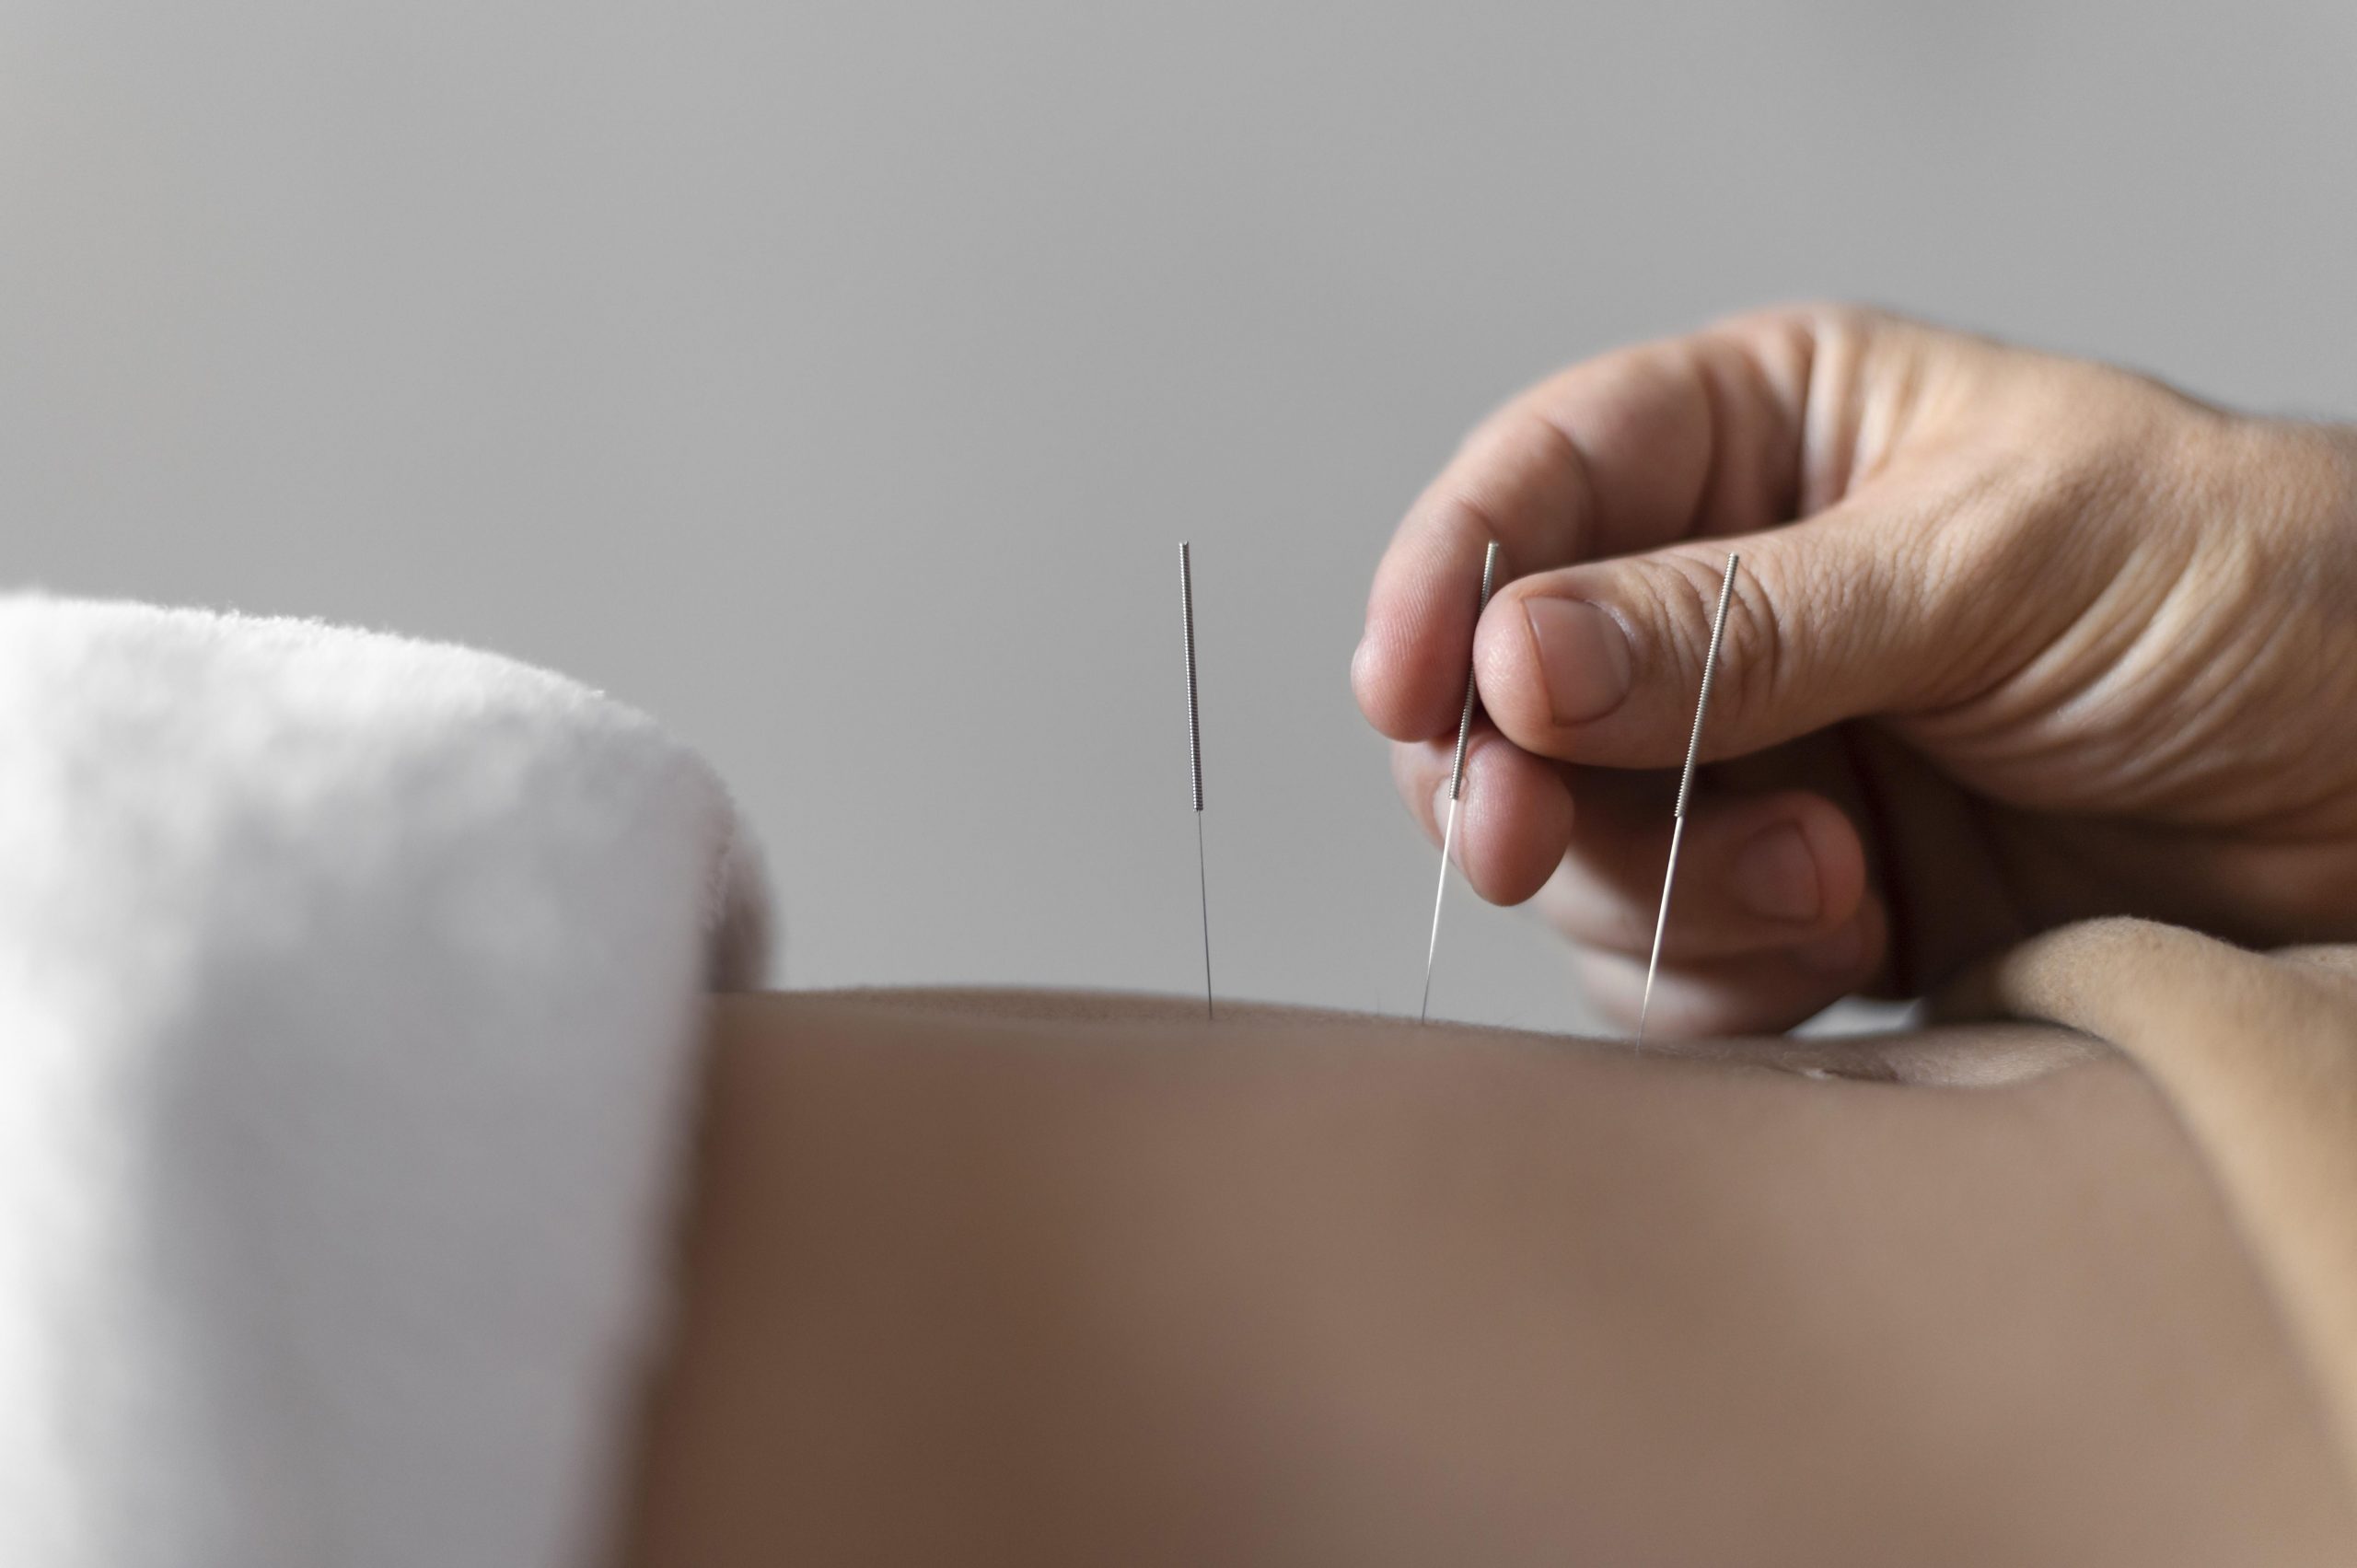 https://hijamahouse.com/wp-content/uploads/2023/01/close-up-hand-holding-acupuncture-needle-scaled.jpg